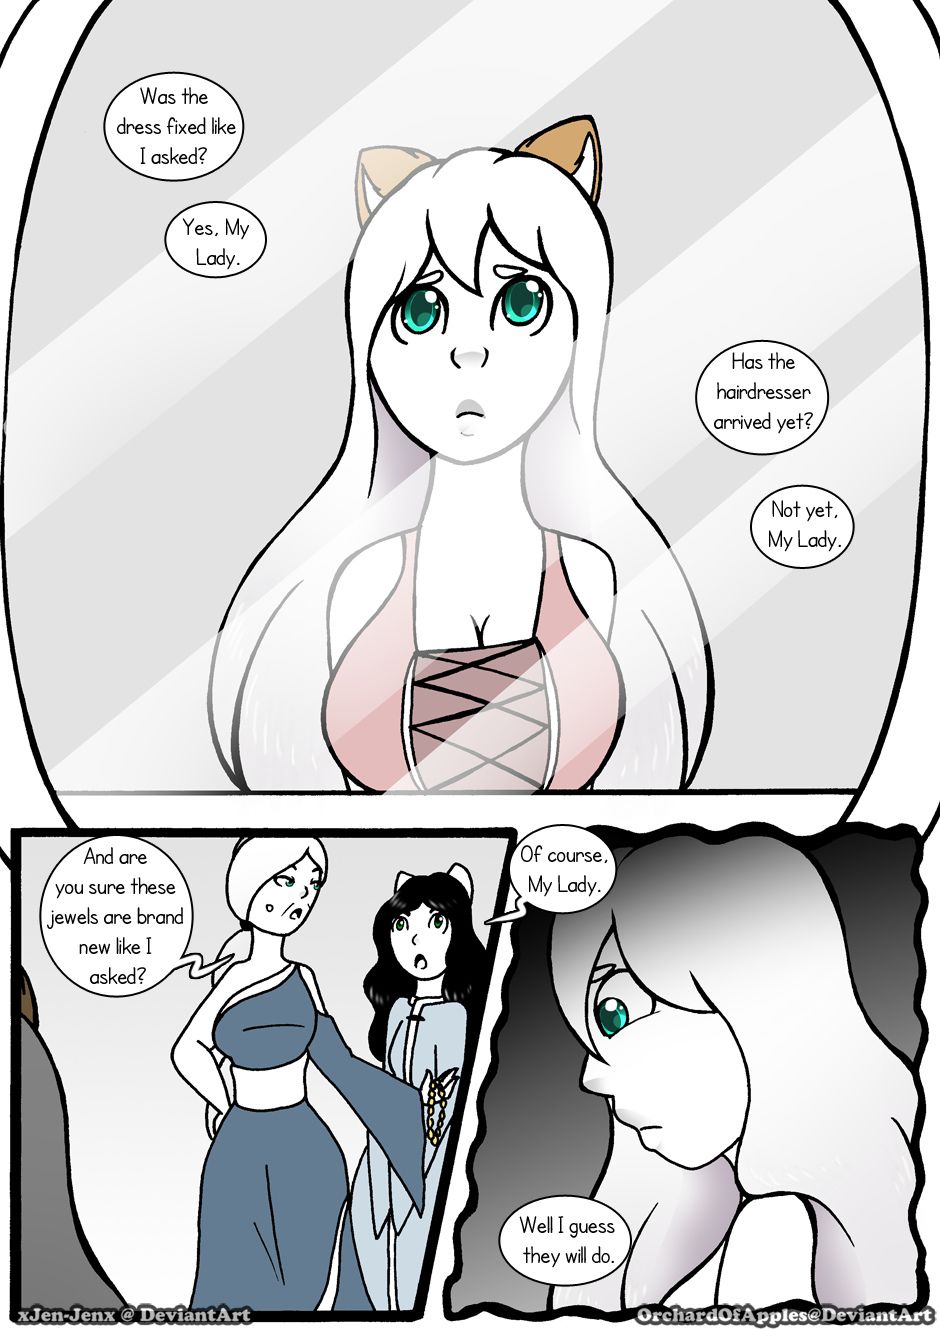 [Jeny-jen94] Between Kings and Queens [Ongoing] 233